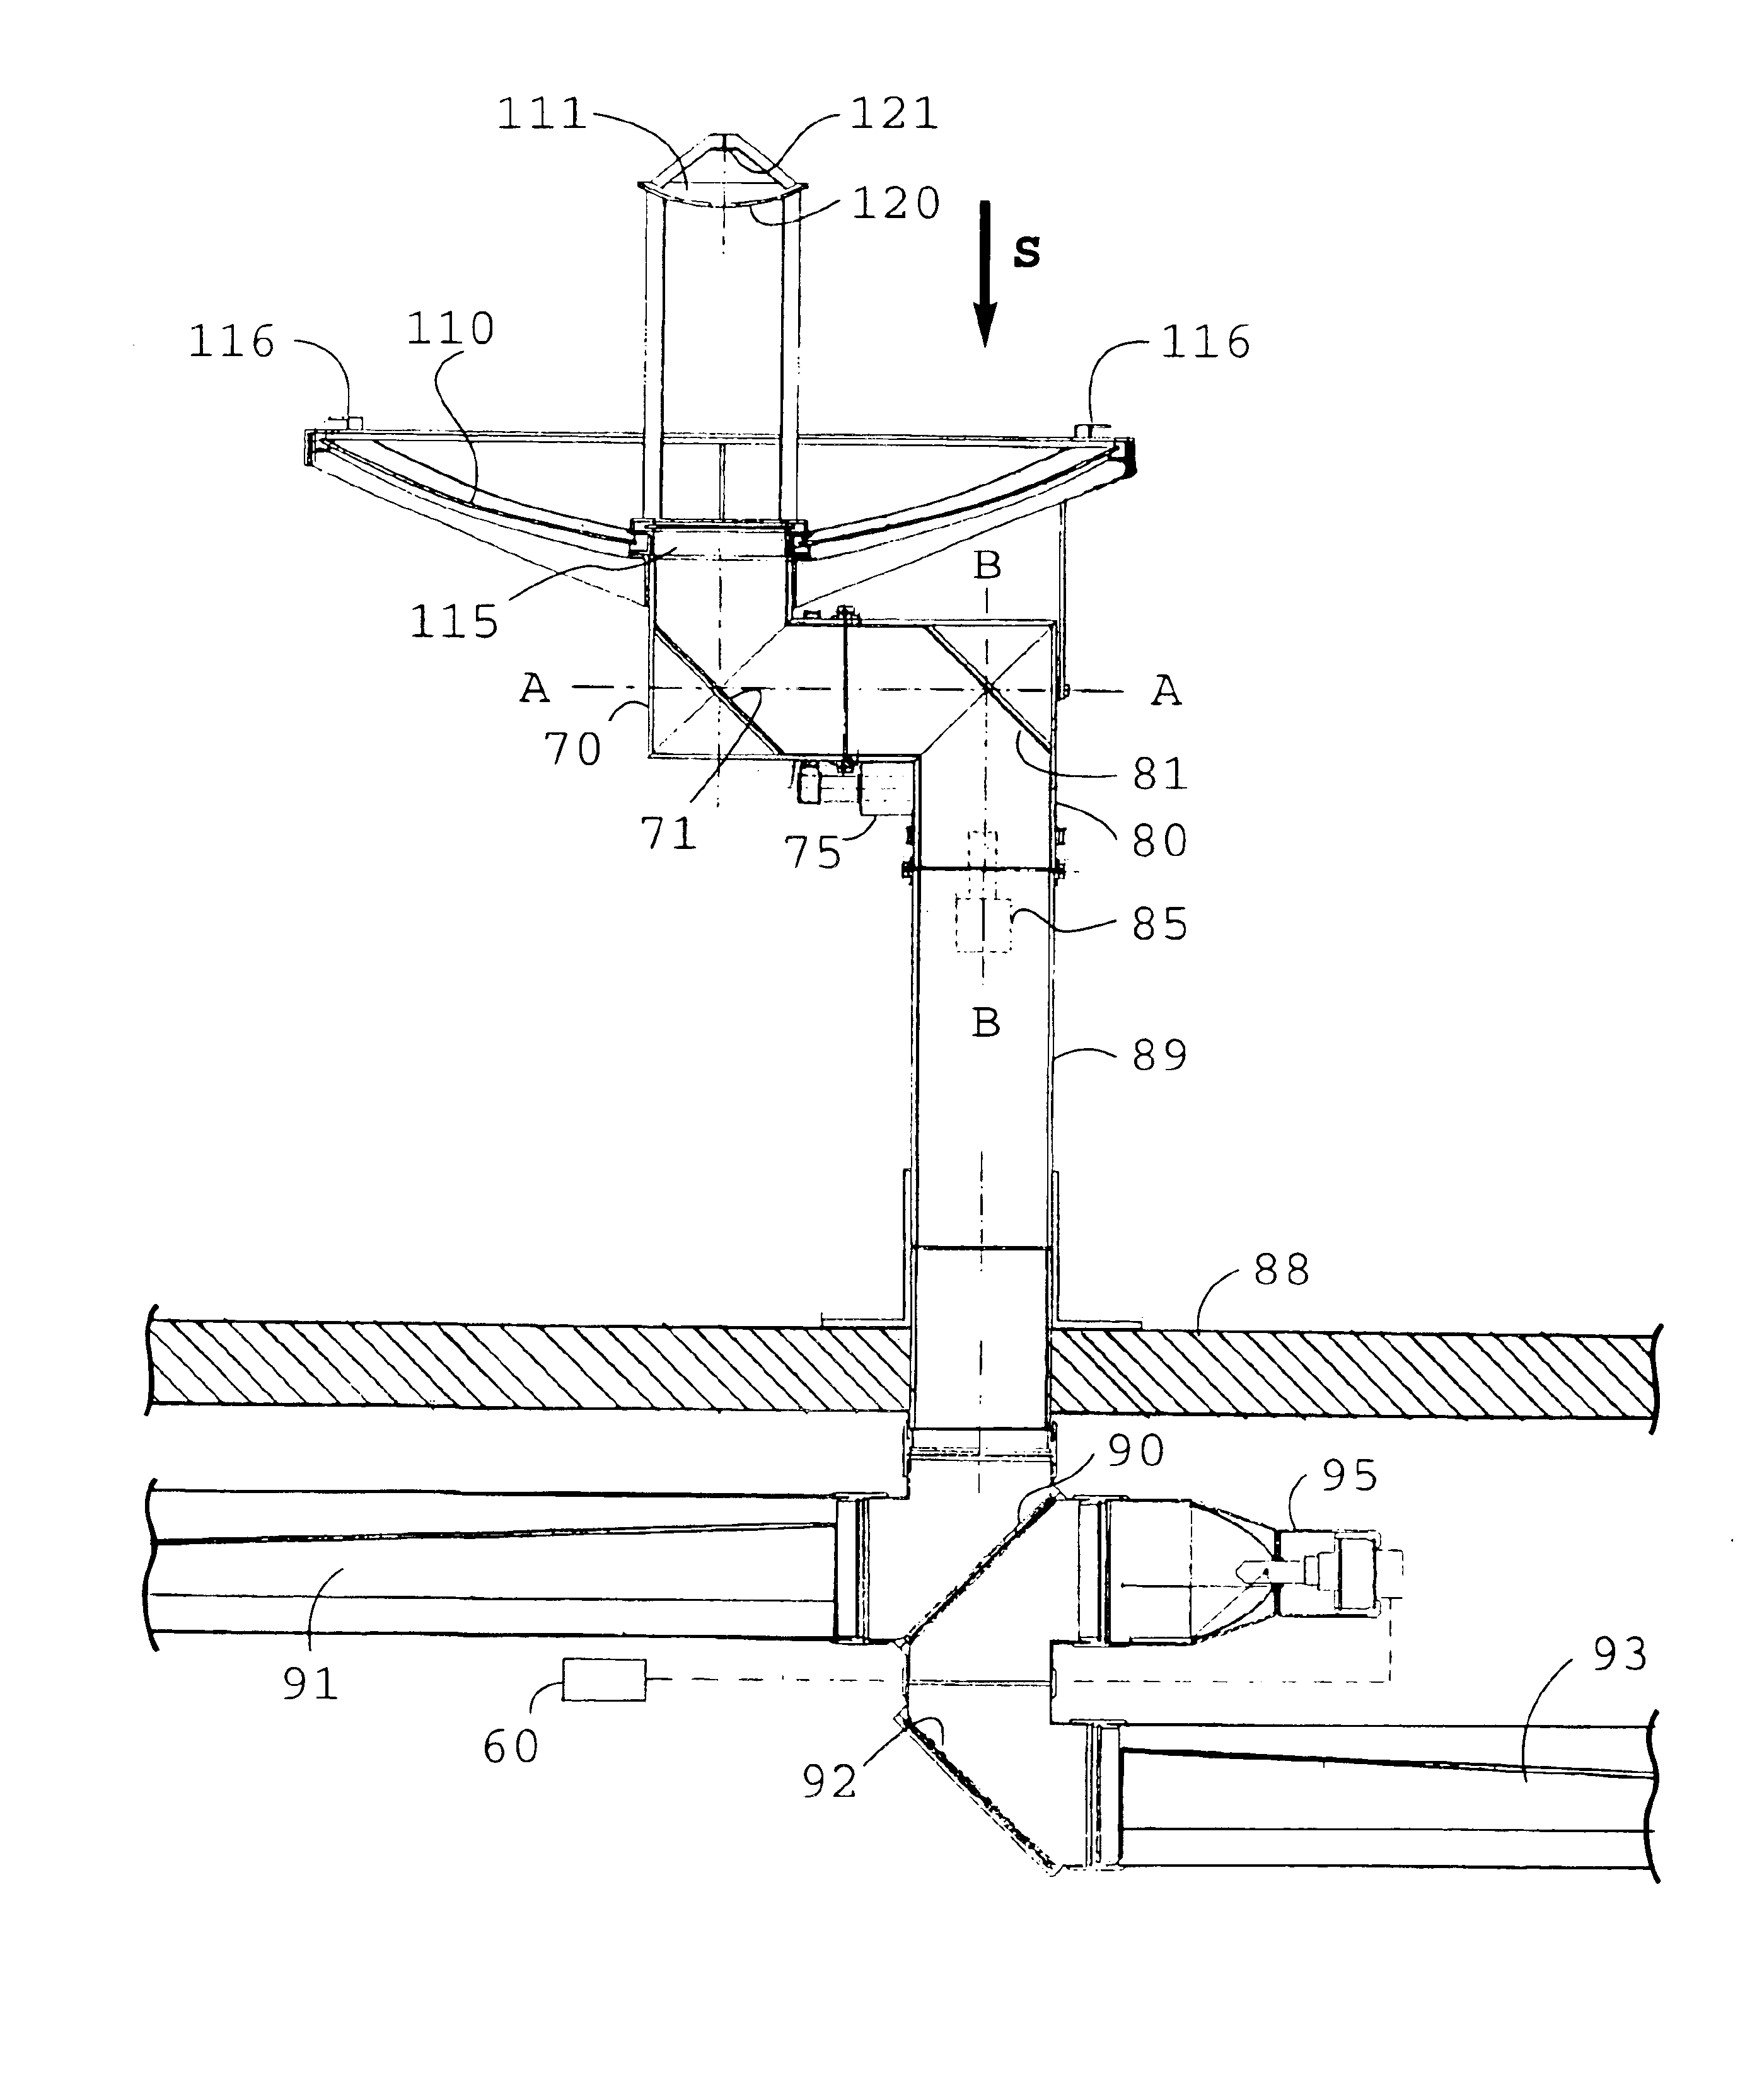 Light tube system for distributing sunlight or artificial light singly or in combination